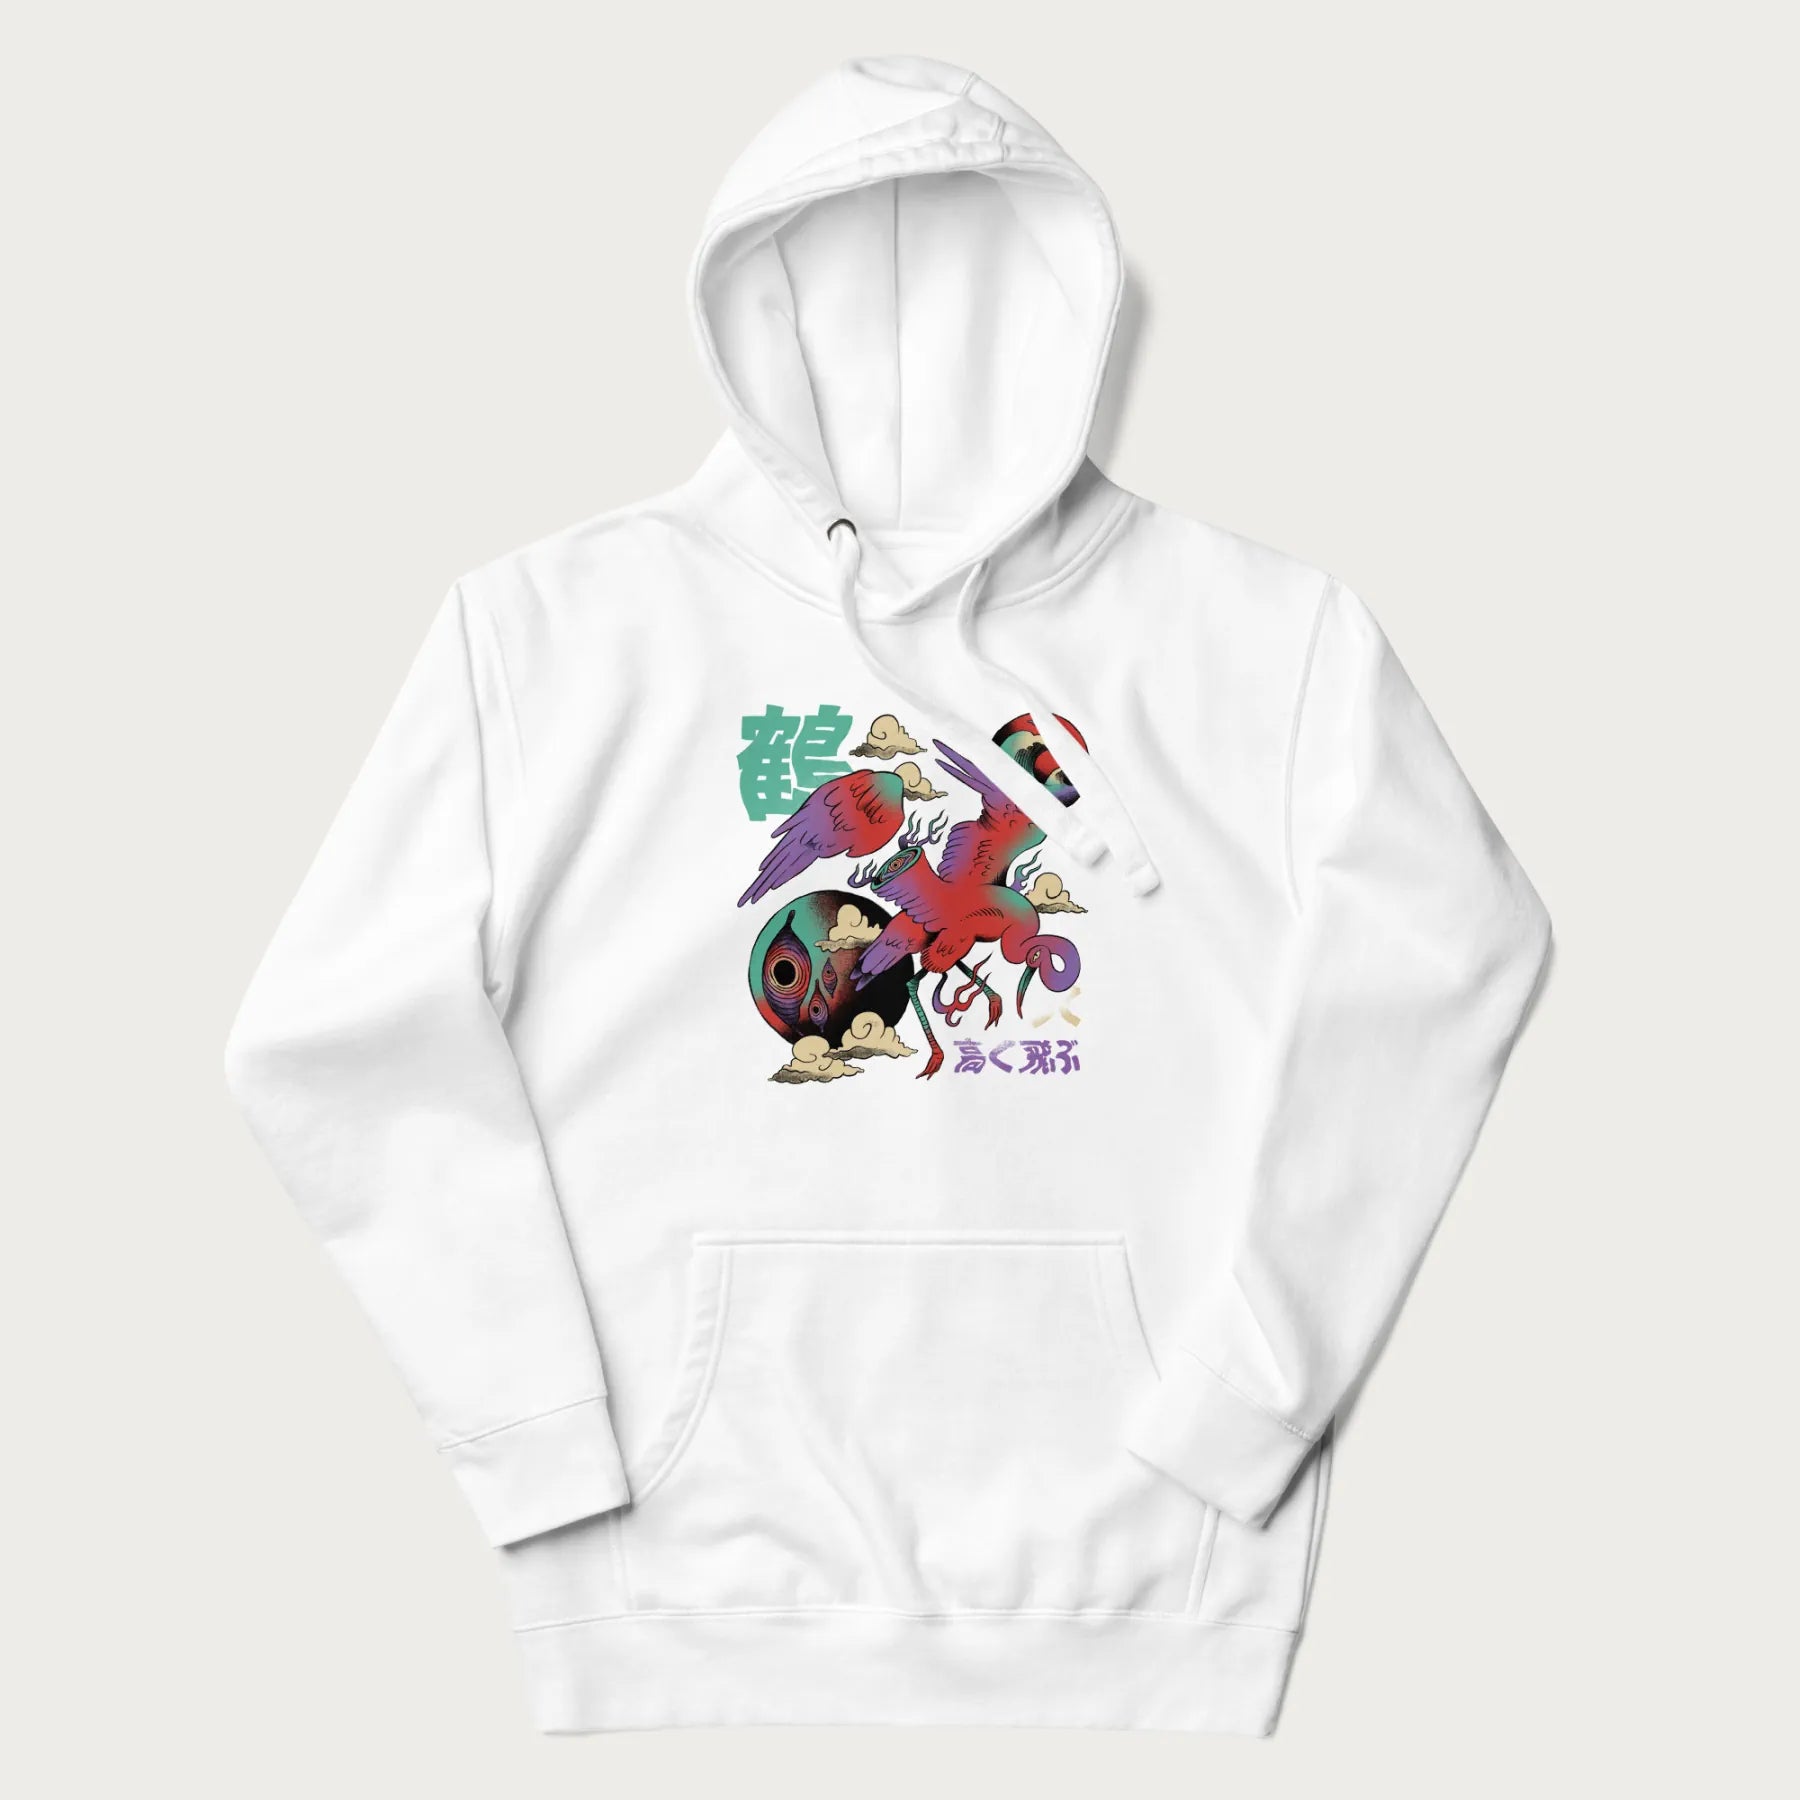 White hoodie with Japanese crane graphic in vibrant colors and Japanese text '鶴' (Crane) and '高く飛ぶ' (Fly High).